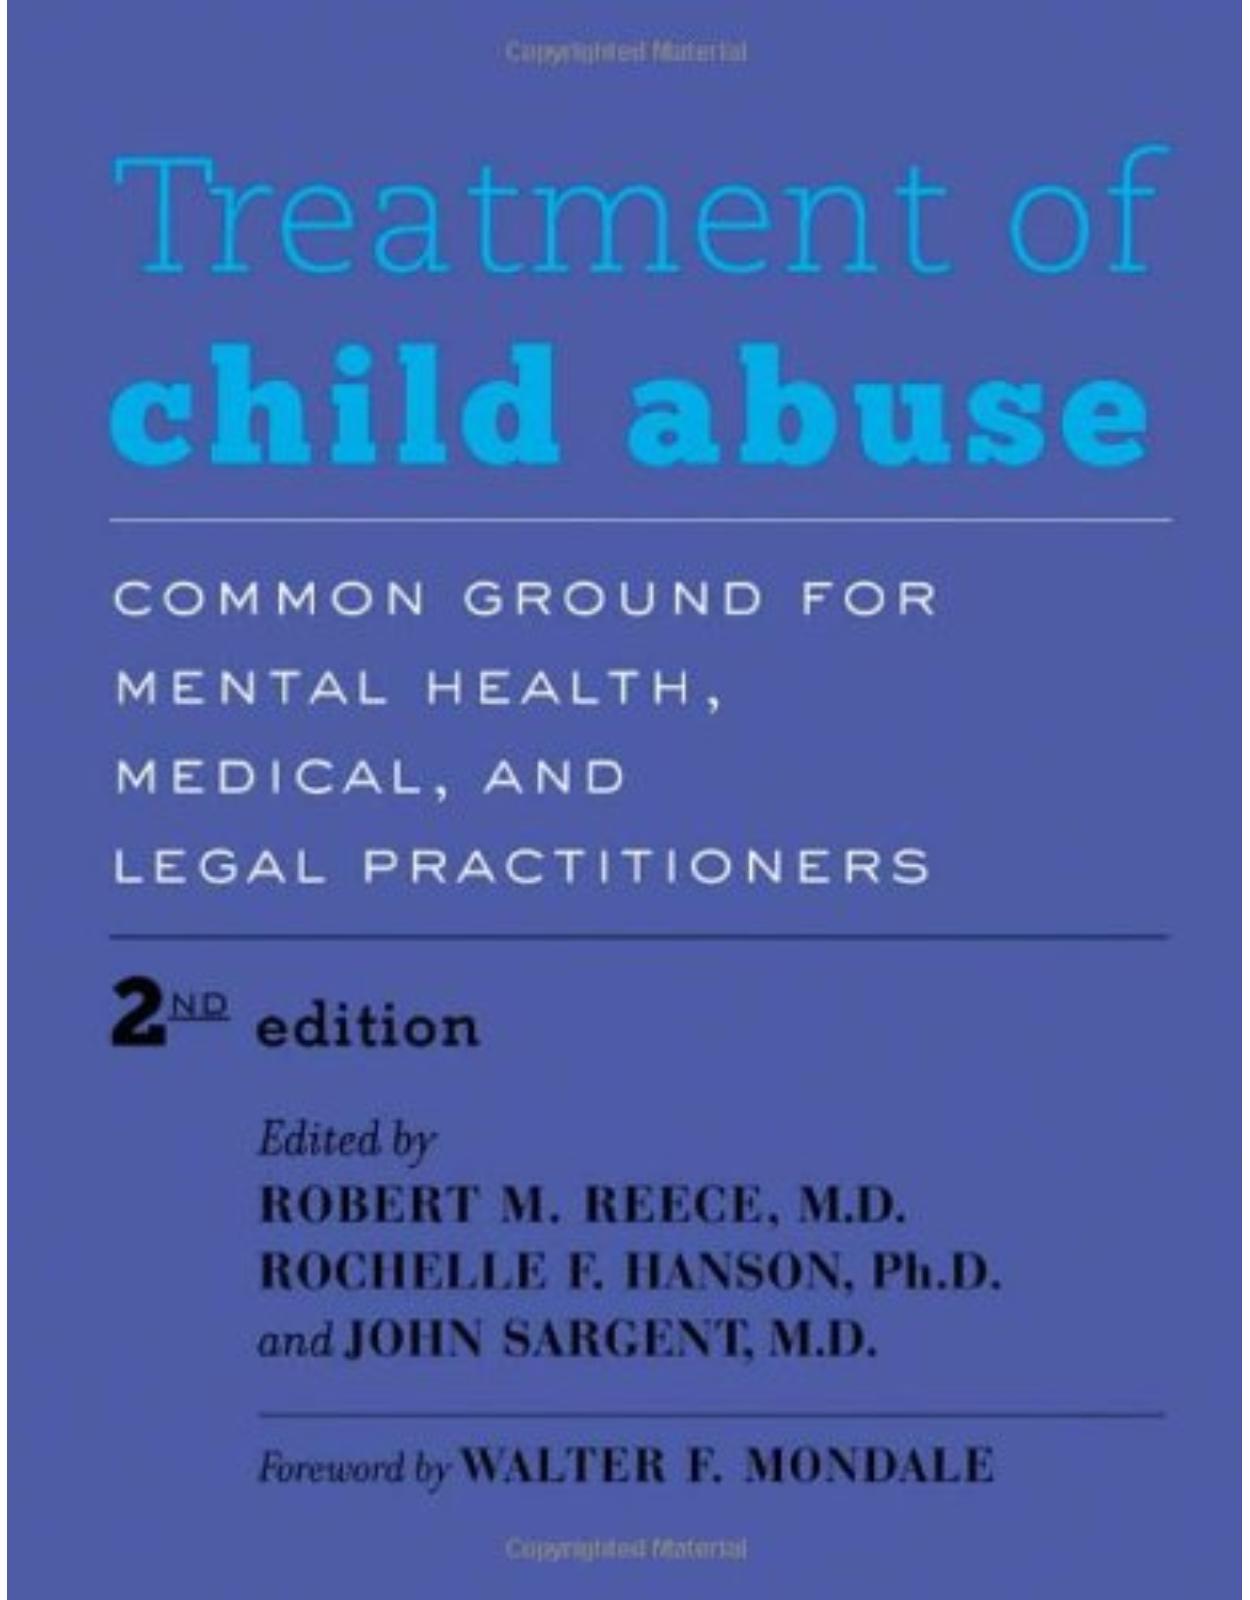 Treatment of Child Abuse, Common Ground for Mental Health, Medical, and Legal Practitioners (Second Edition)